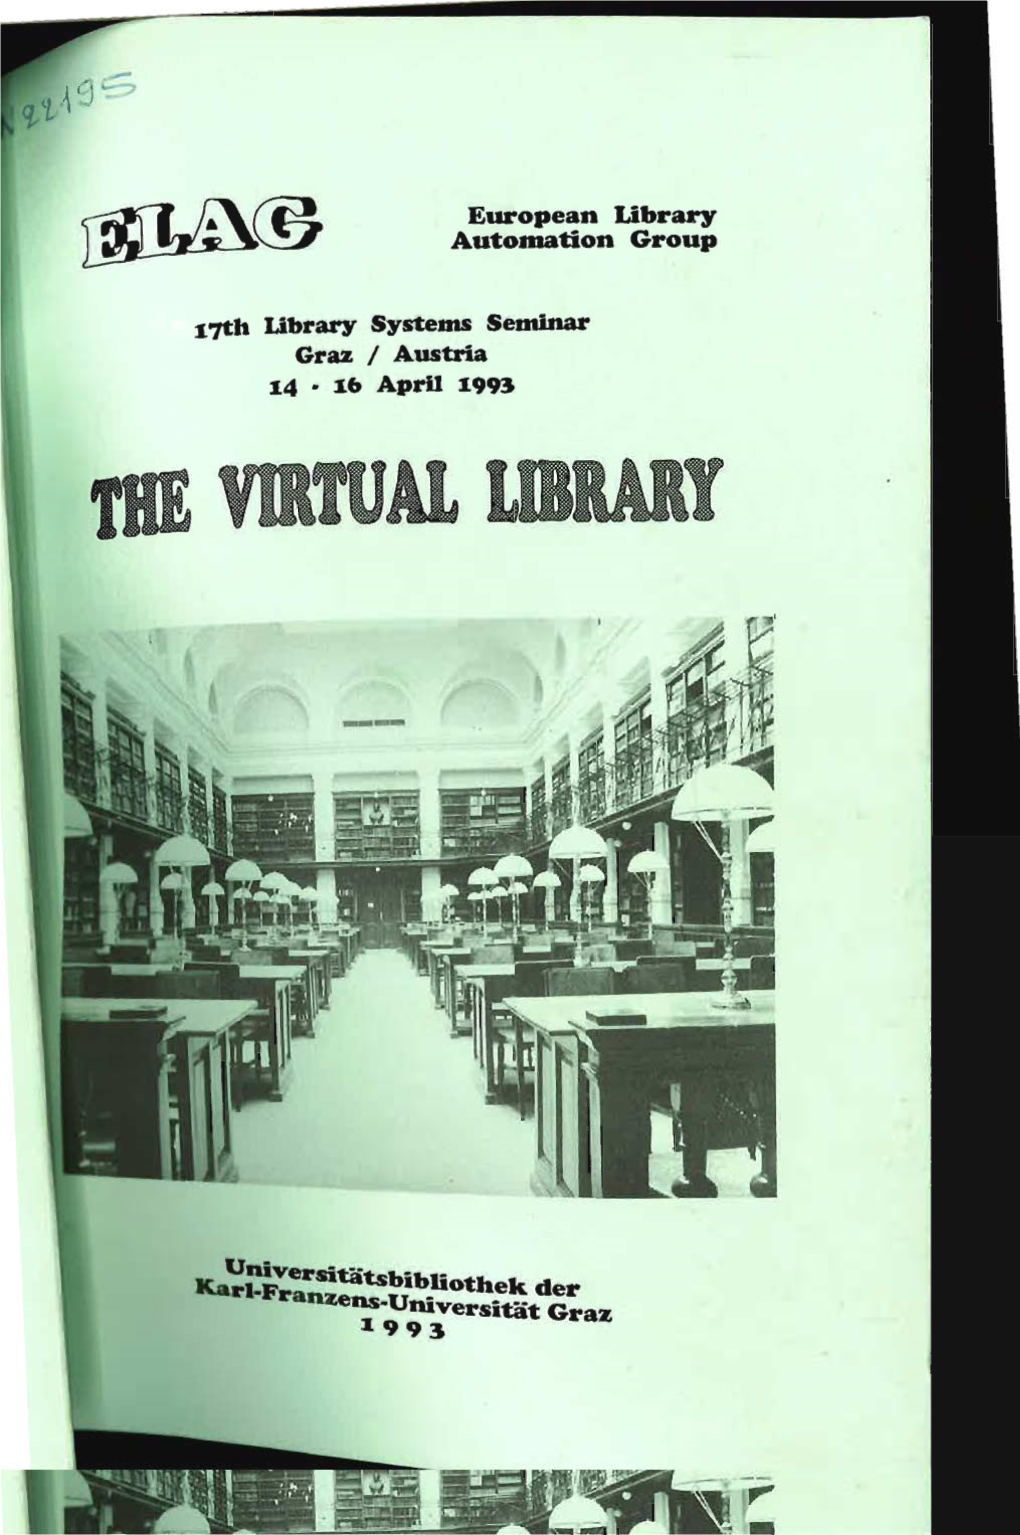 The Virtual Library